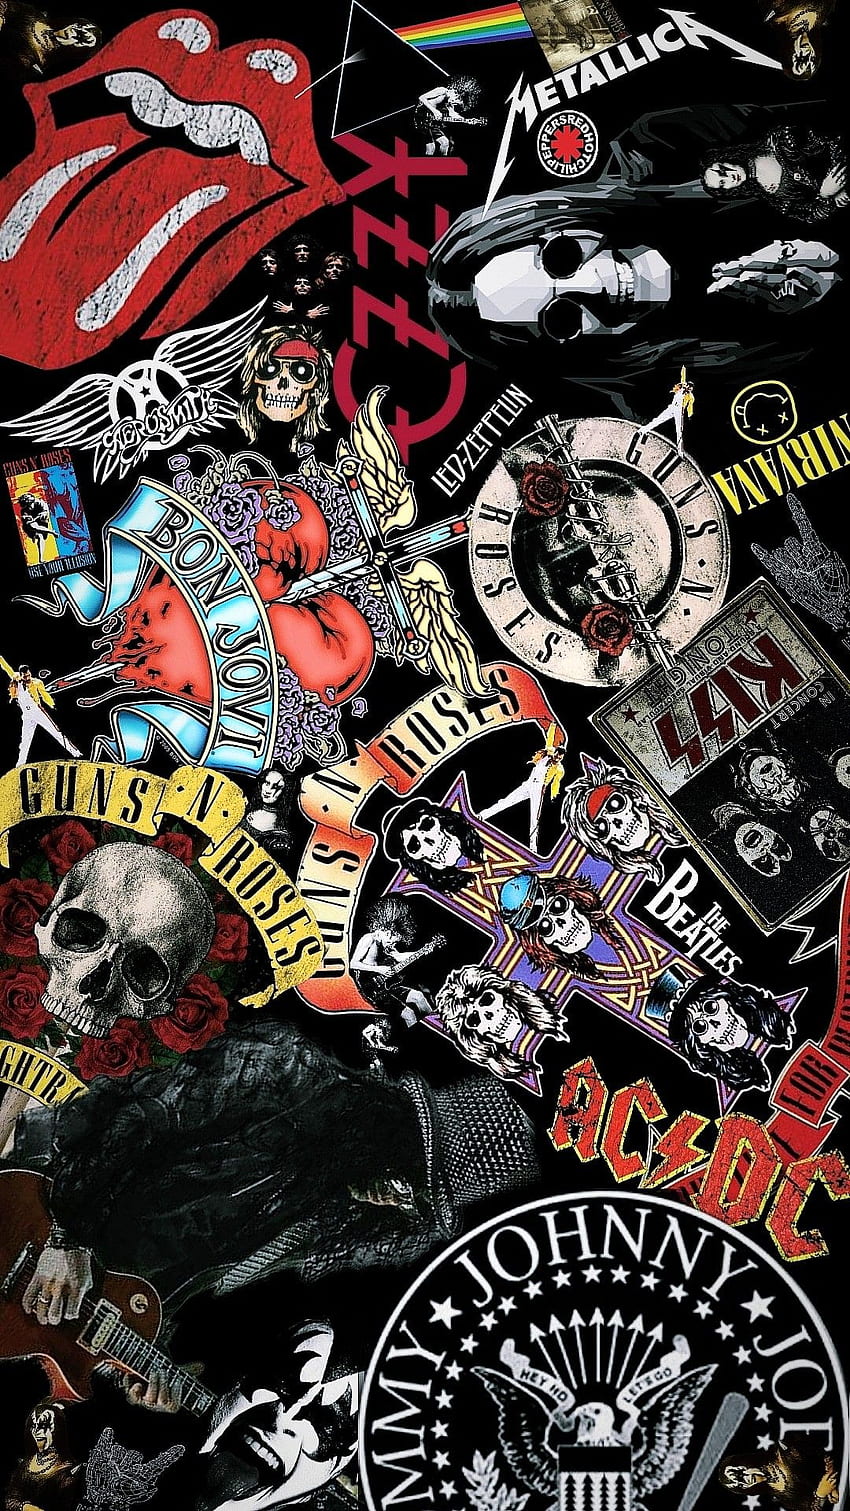 Rock and Roll wallpaper for your phone - Punk